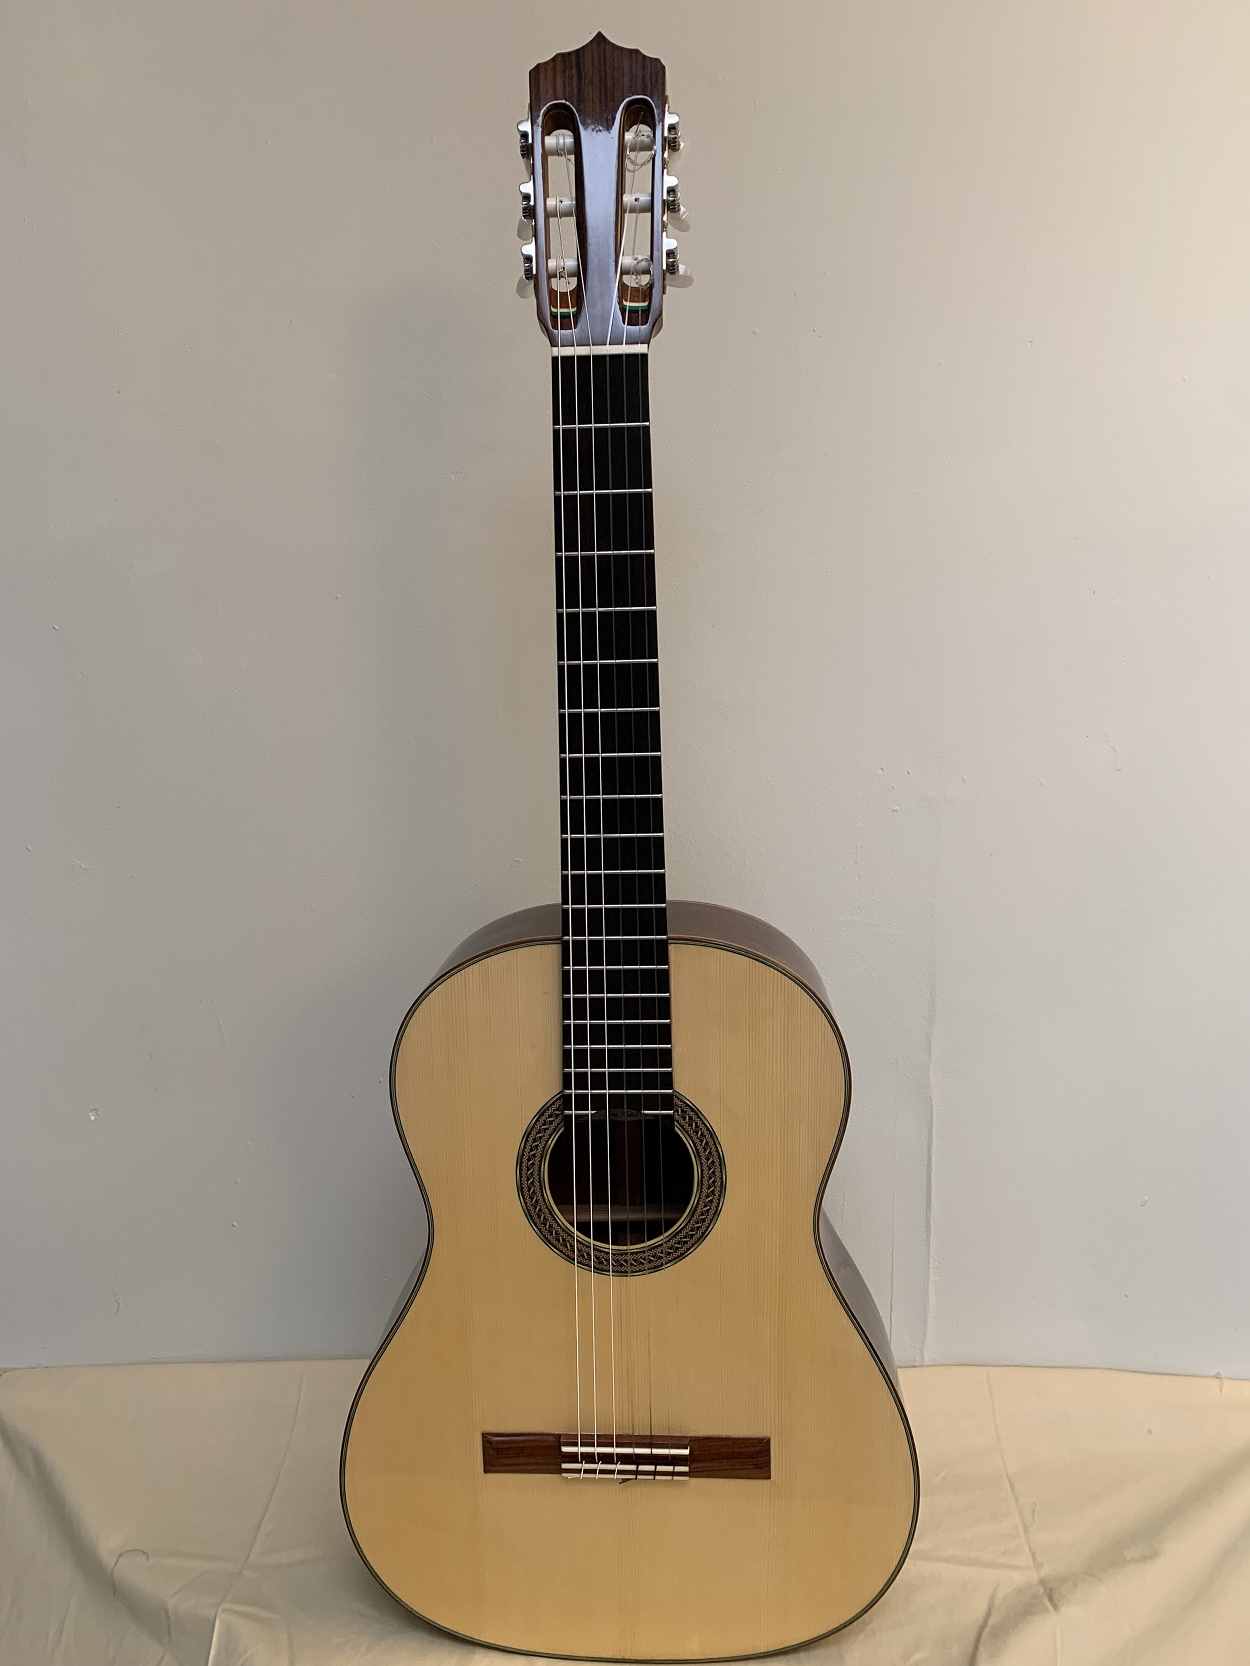 A Rios Nebro Concert Classical Guitar Spruce top, Indian Rosewood back and sides